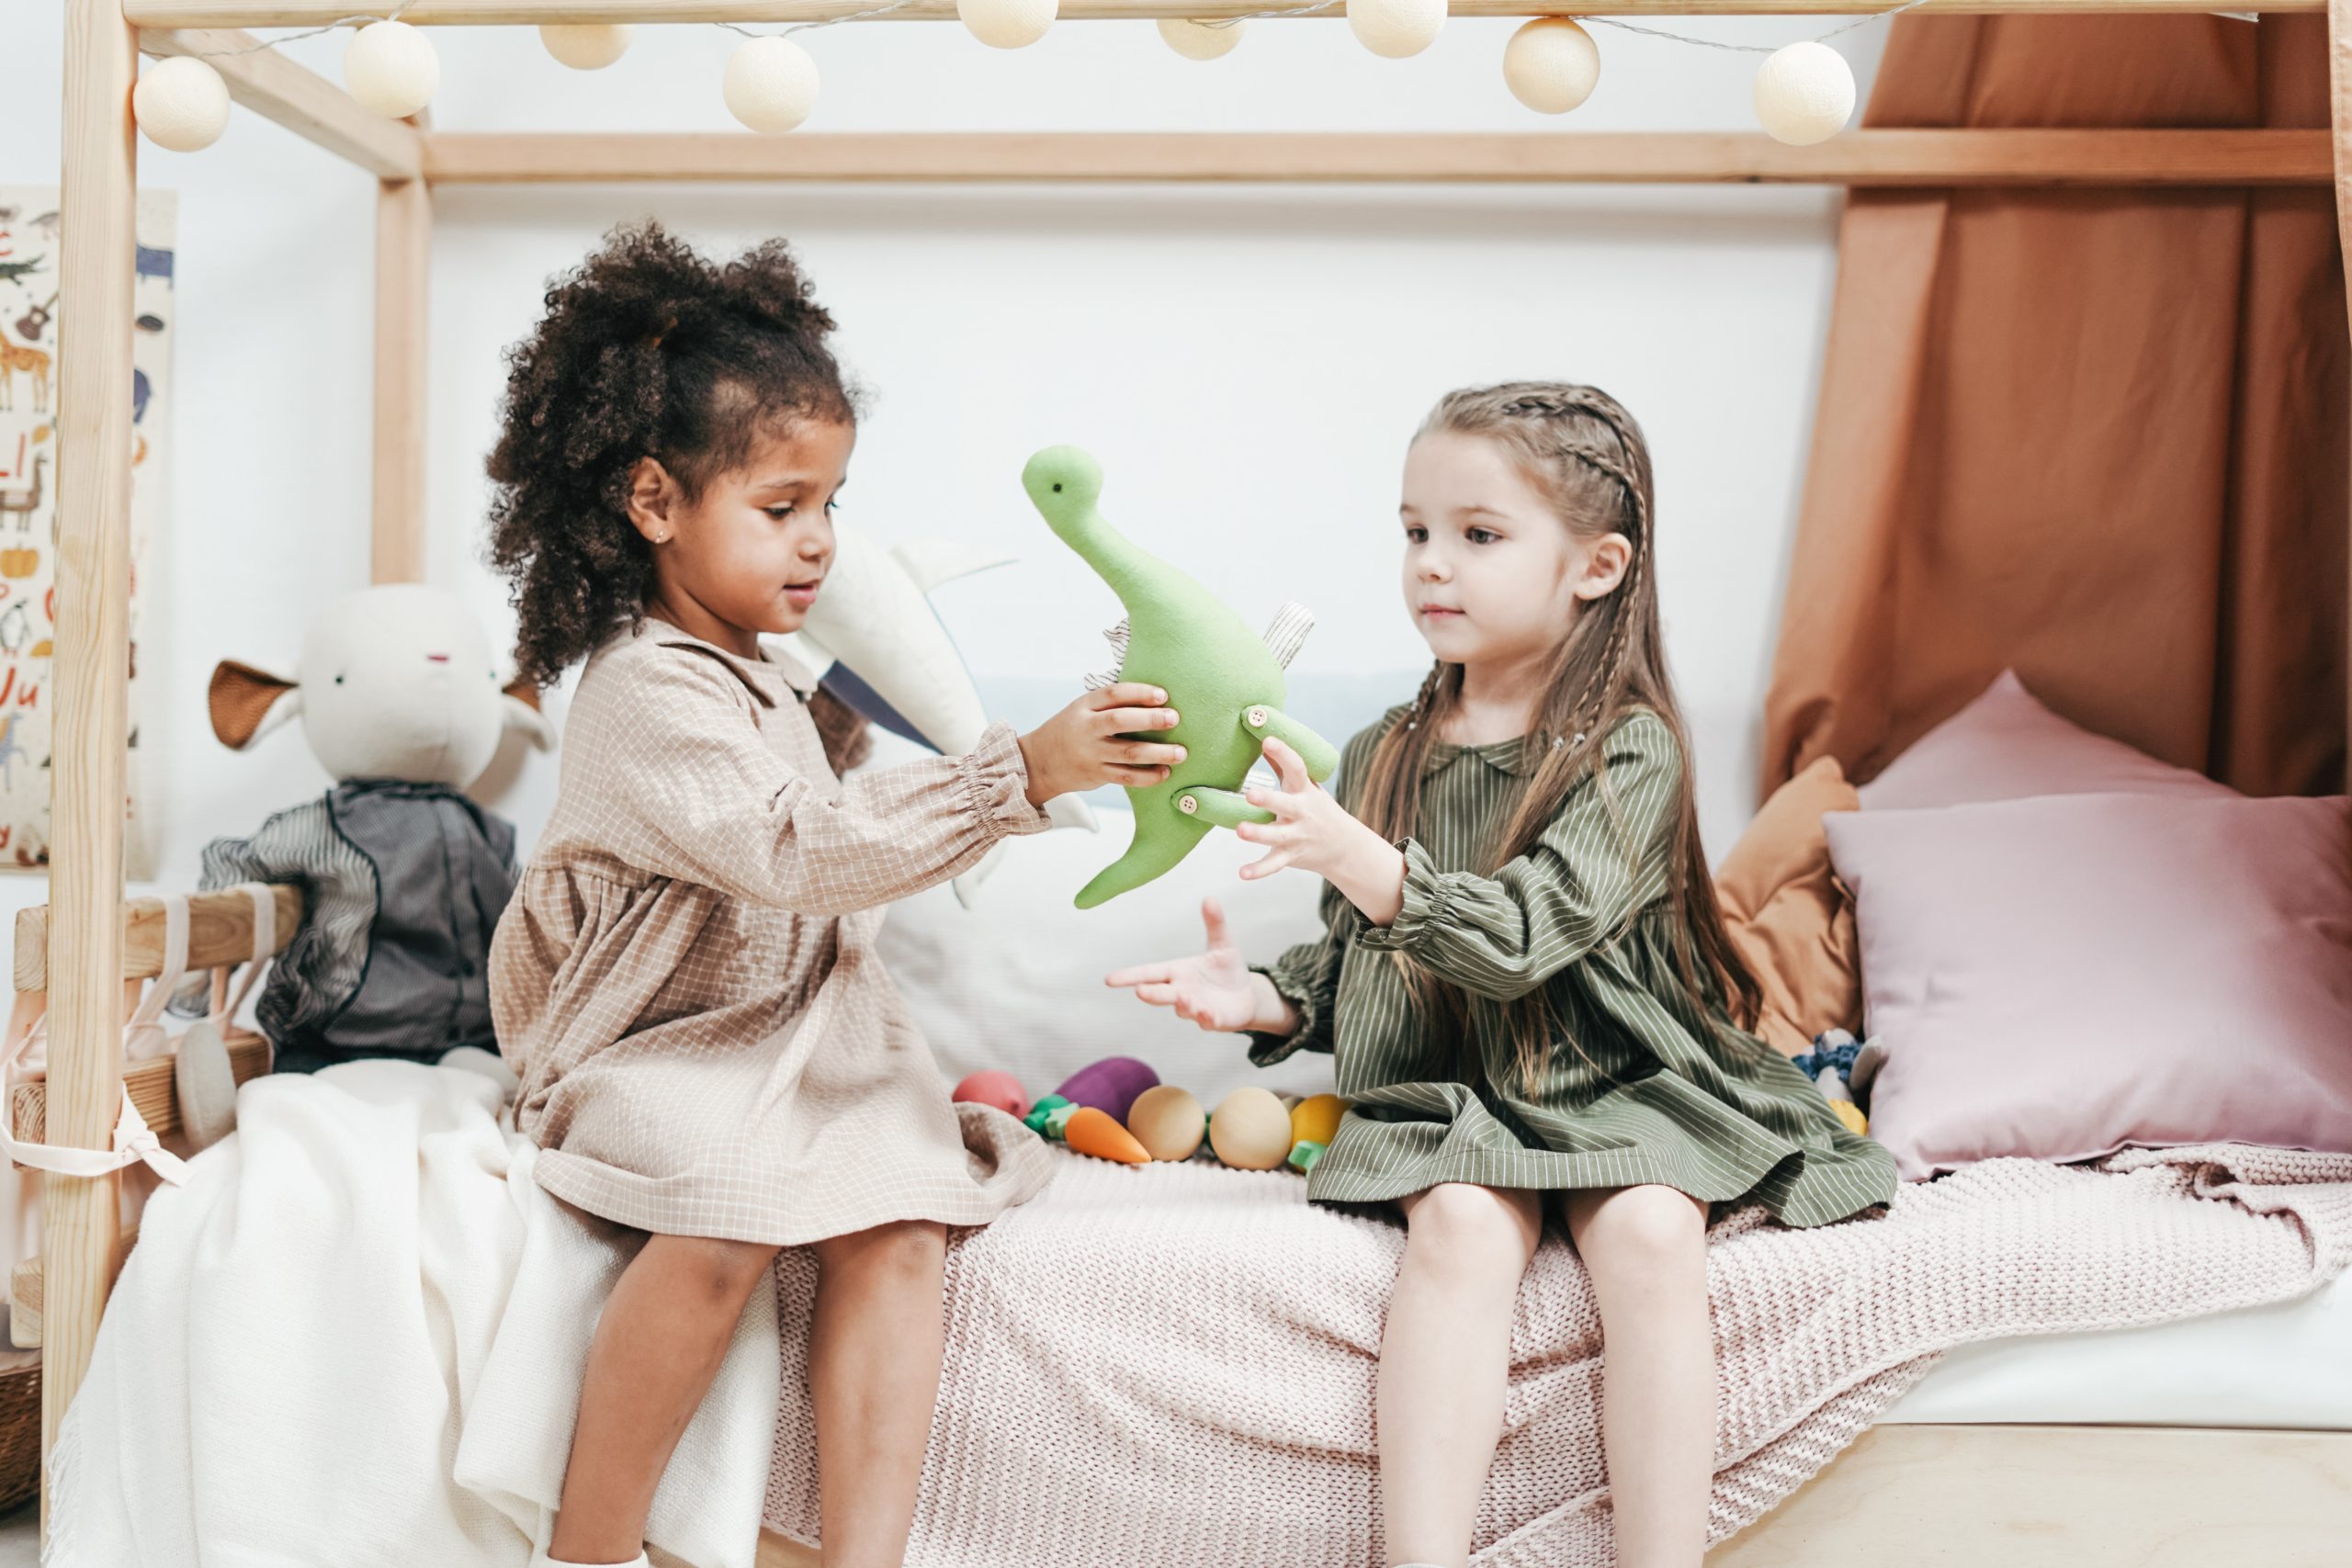 Two children holding a green dinosaur toy